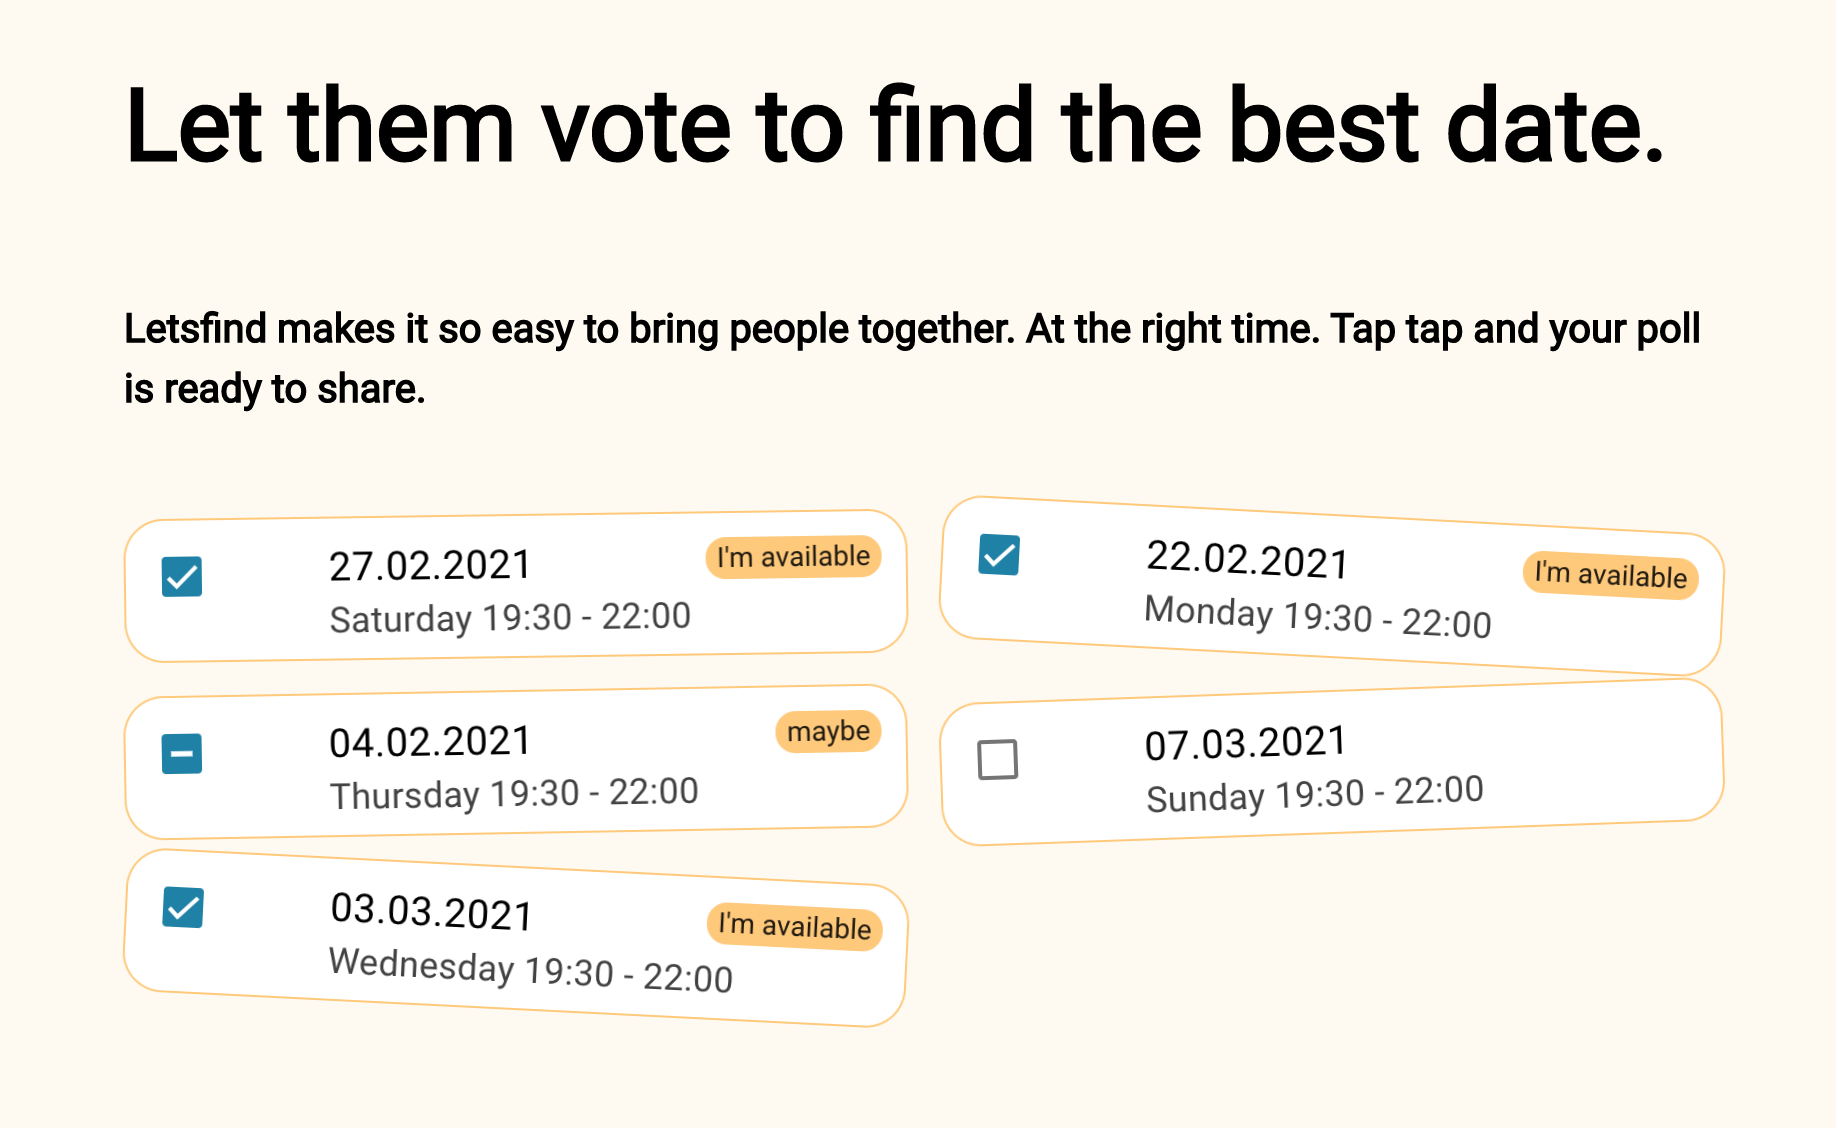 Create a meeting poll to find a date and time that works for everyone